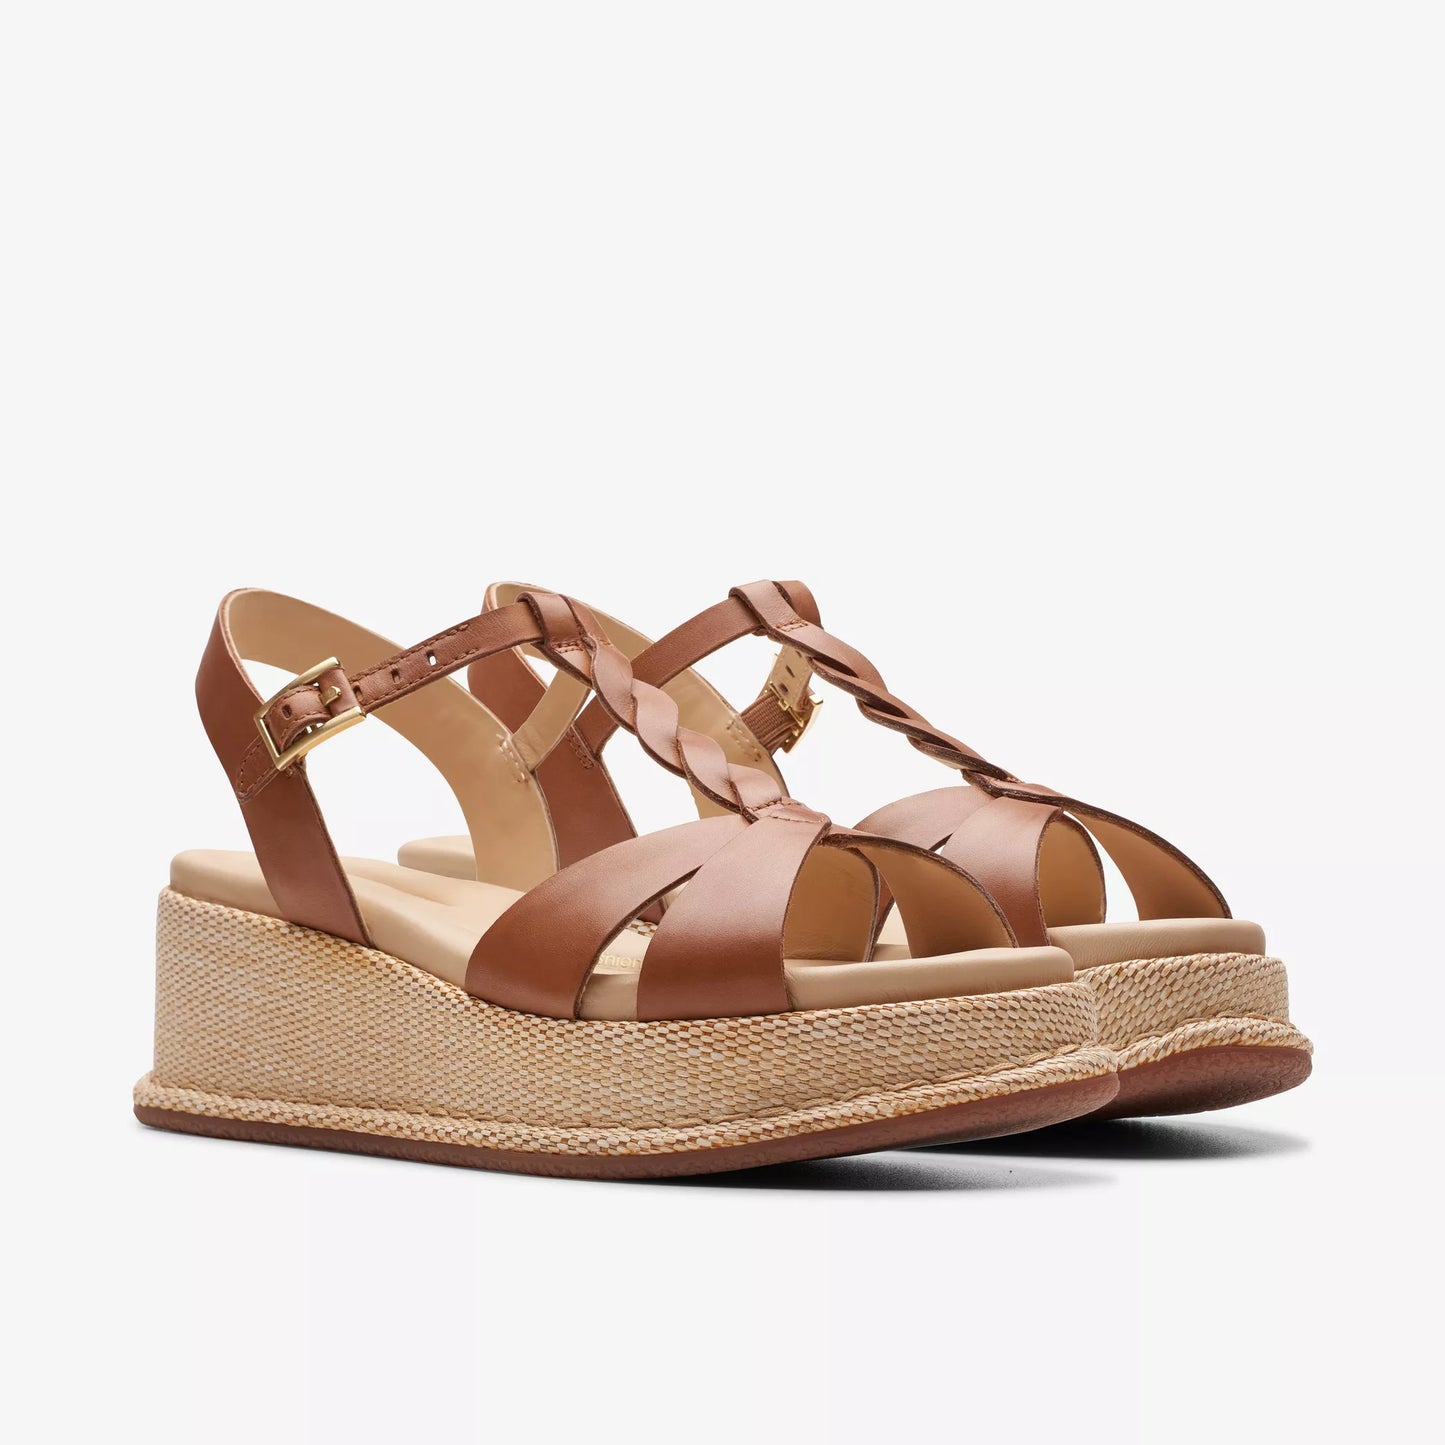 The Tan Leather Kimmei Twist Wedge by Clarks